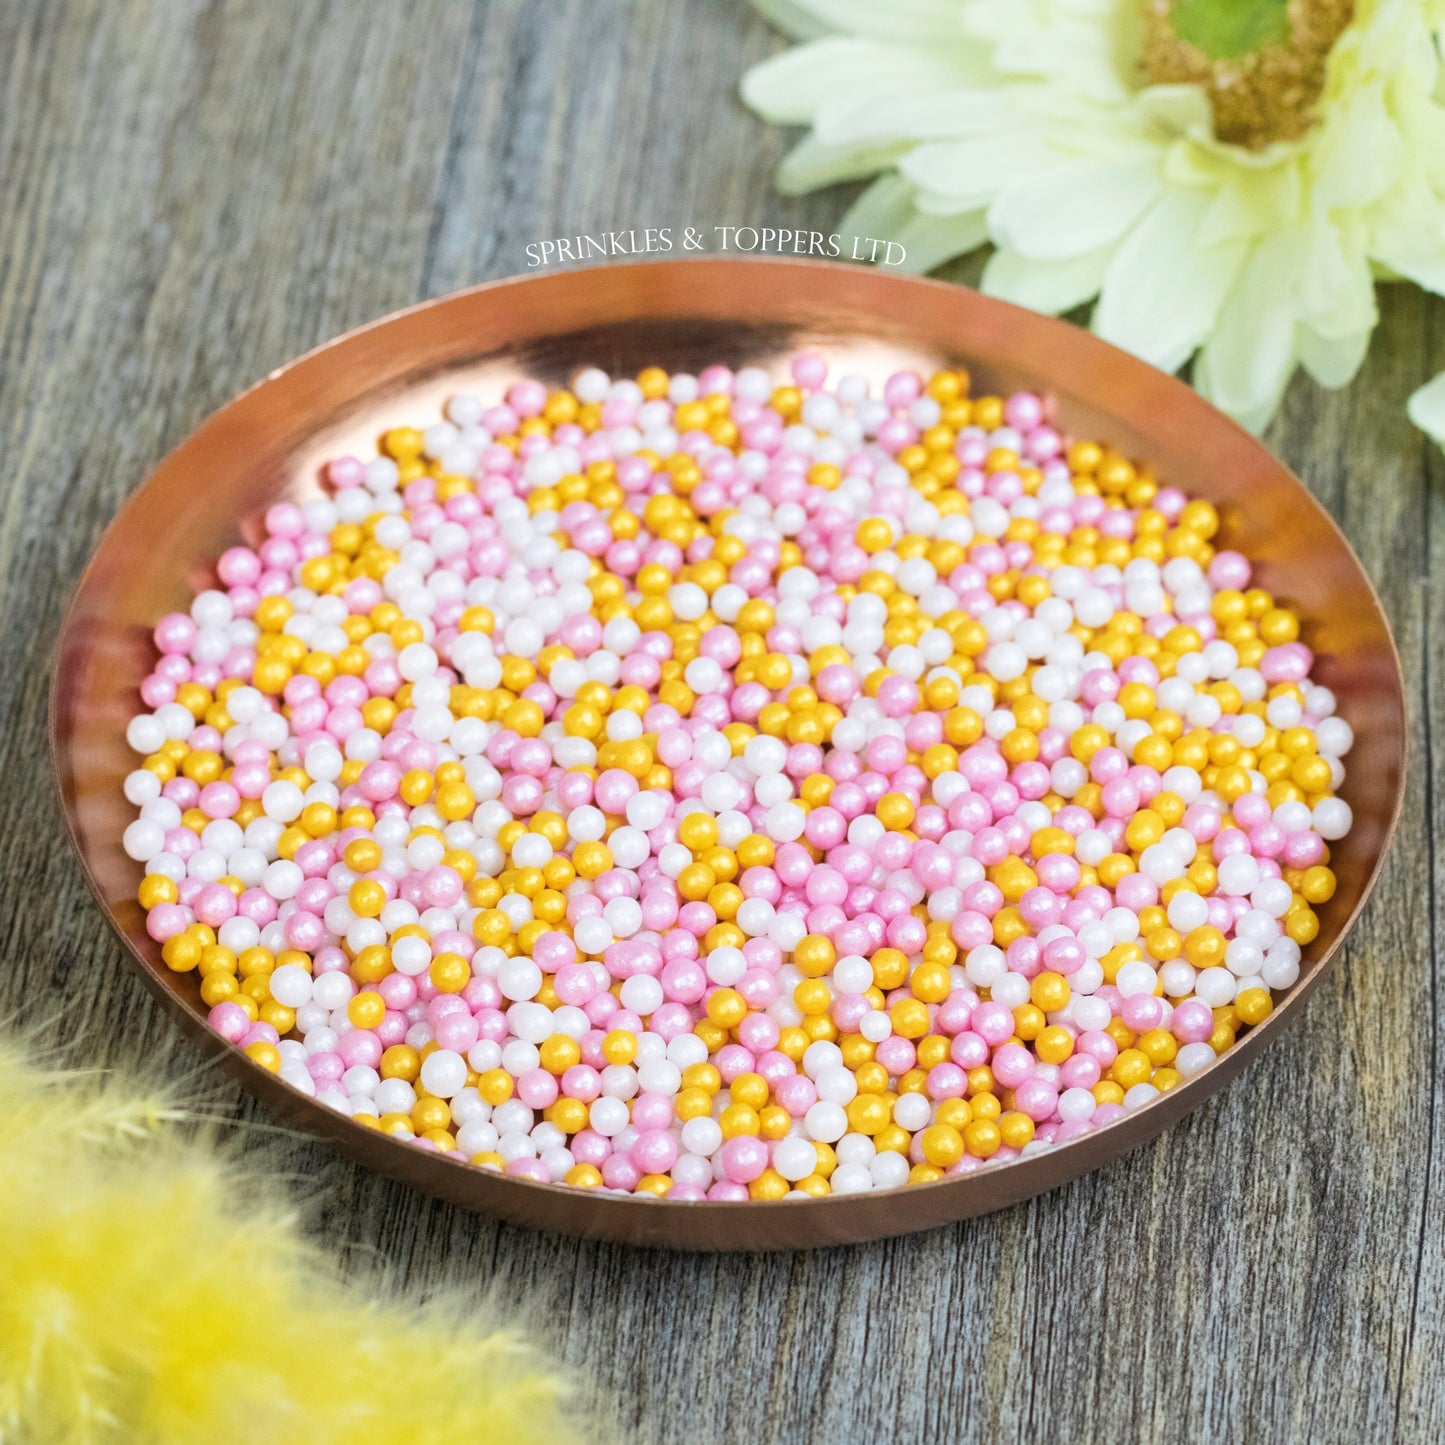 Pink White & Gold Glimmer Pearls (3-4mm) Sprinkles